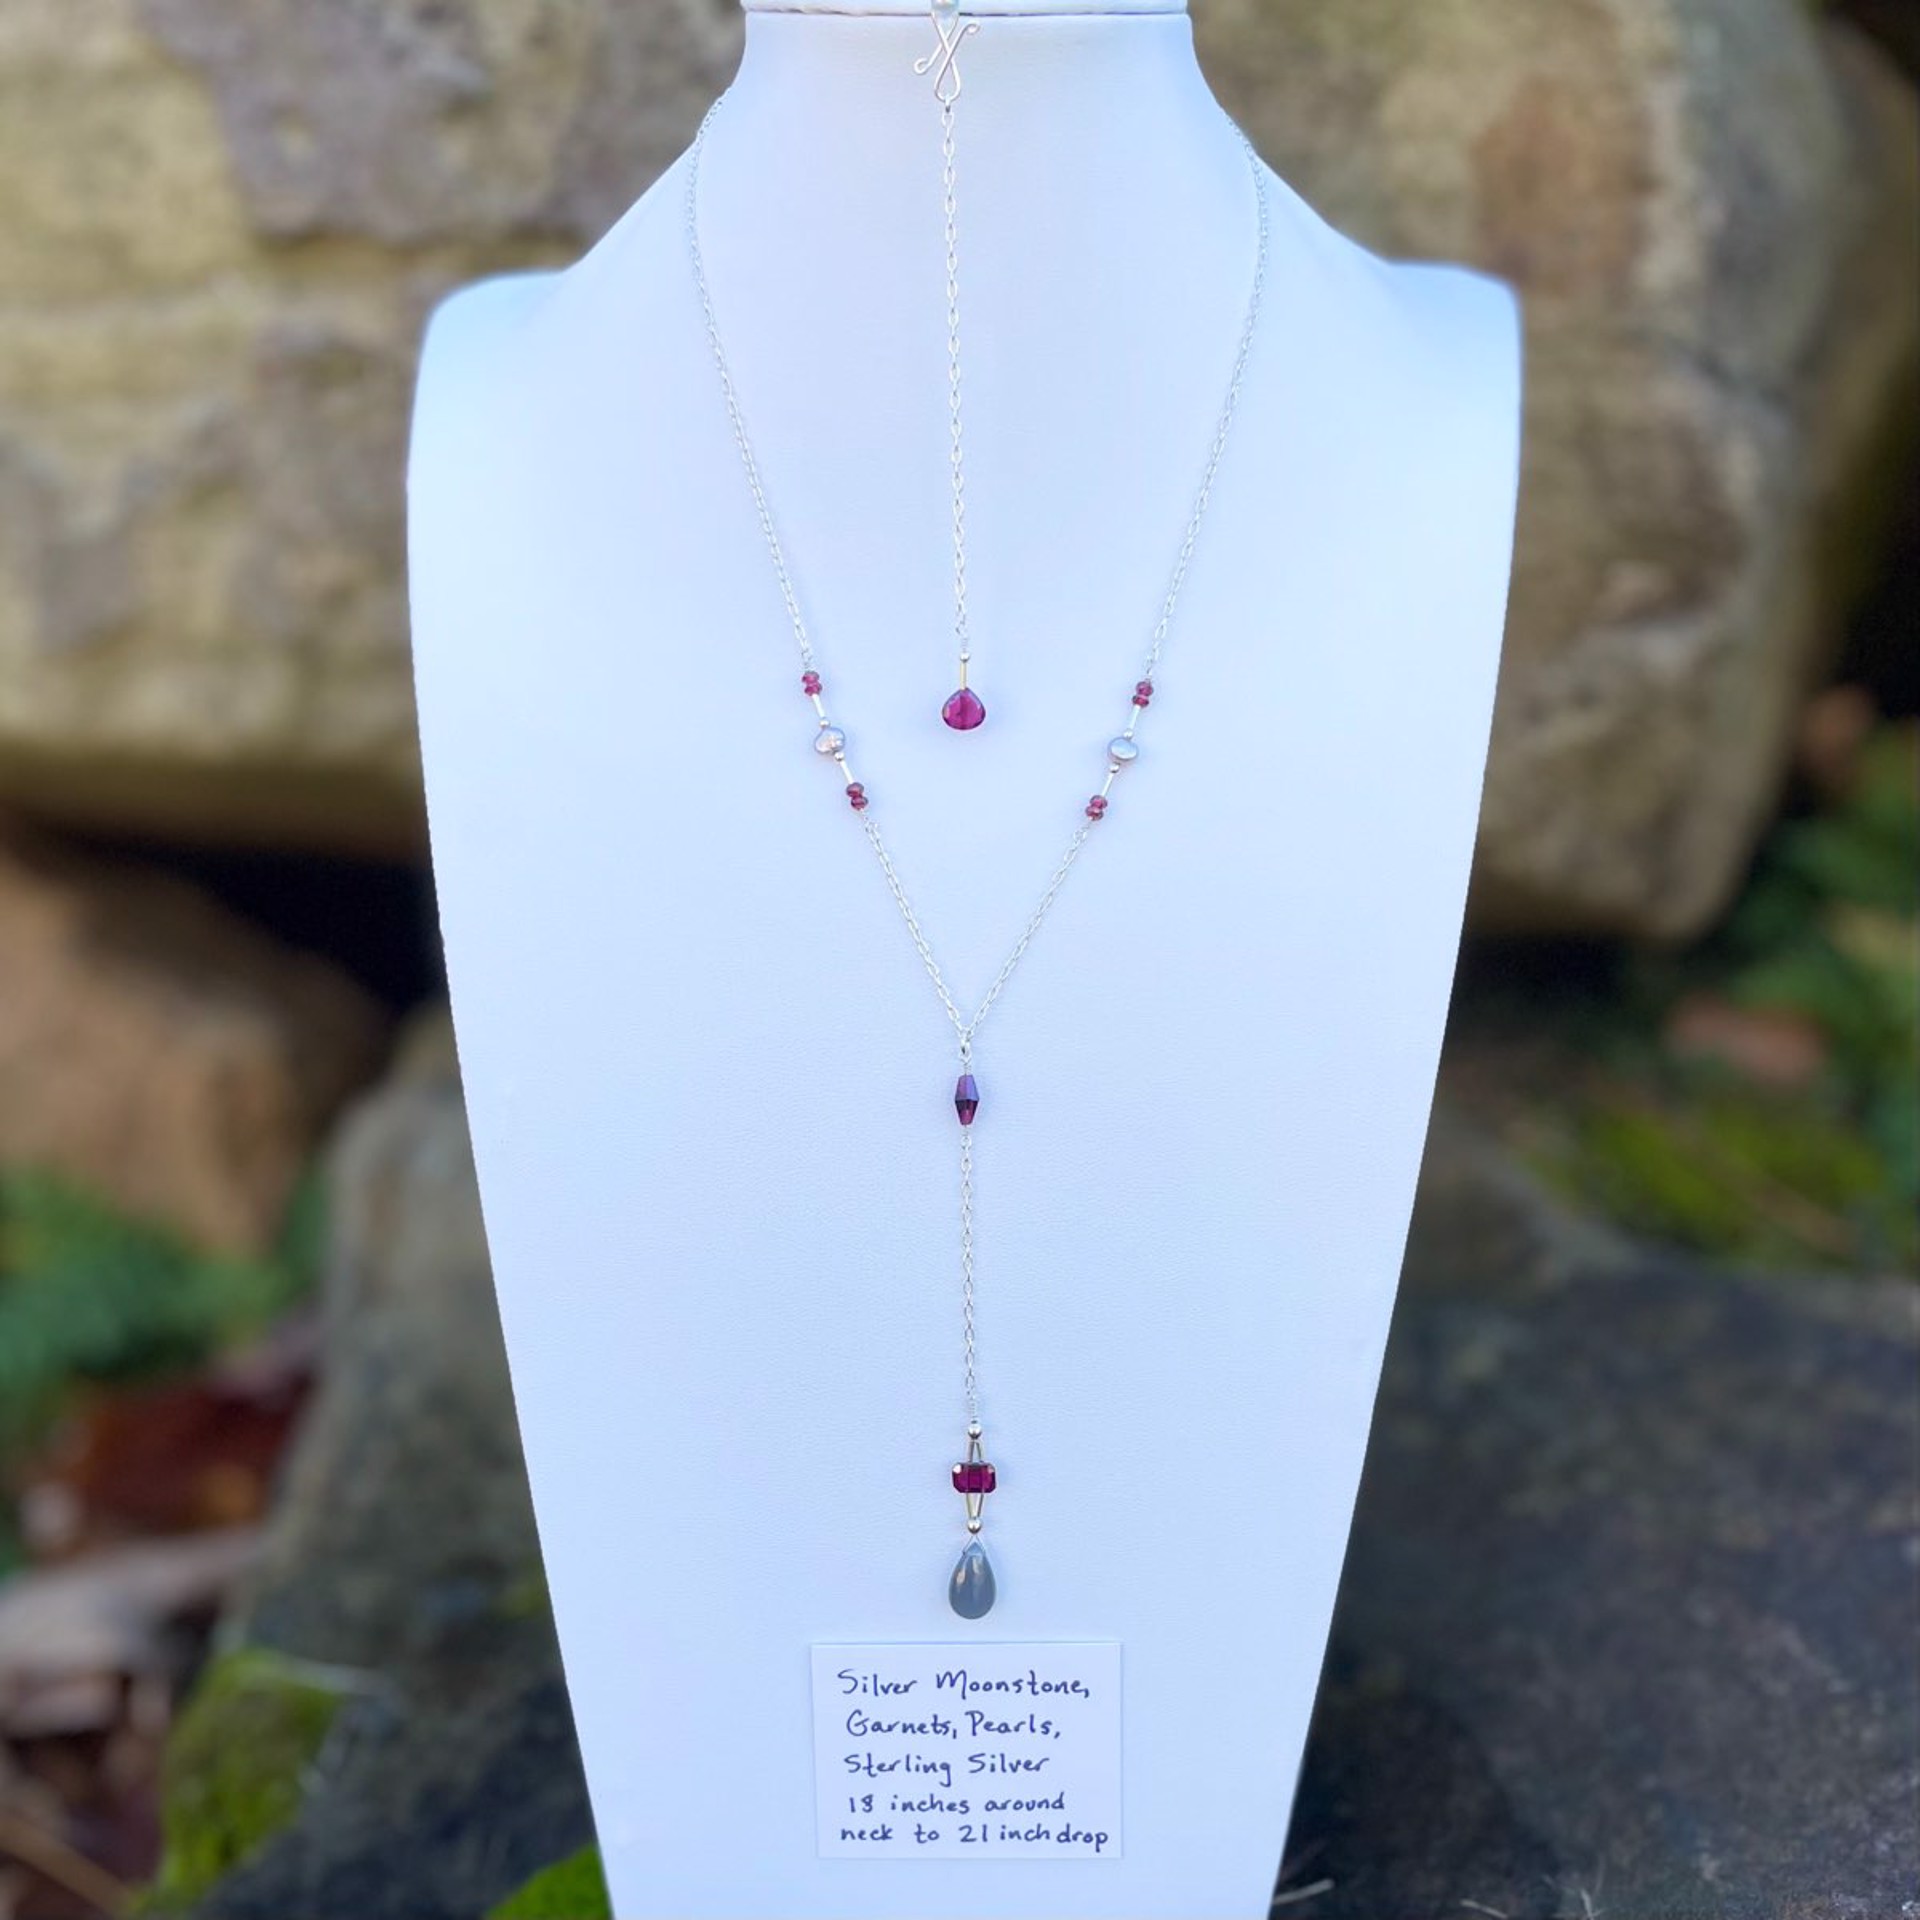 Silver Moonstone, Garnets, Pearls, and Sterling Silver Necklace Infinity Pendant Set by Lisa Kelley